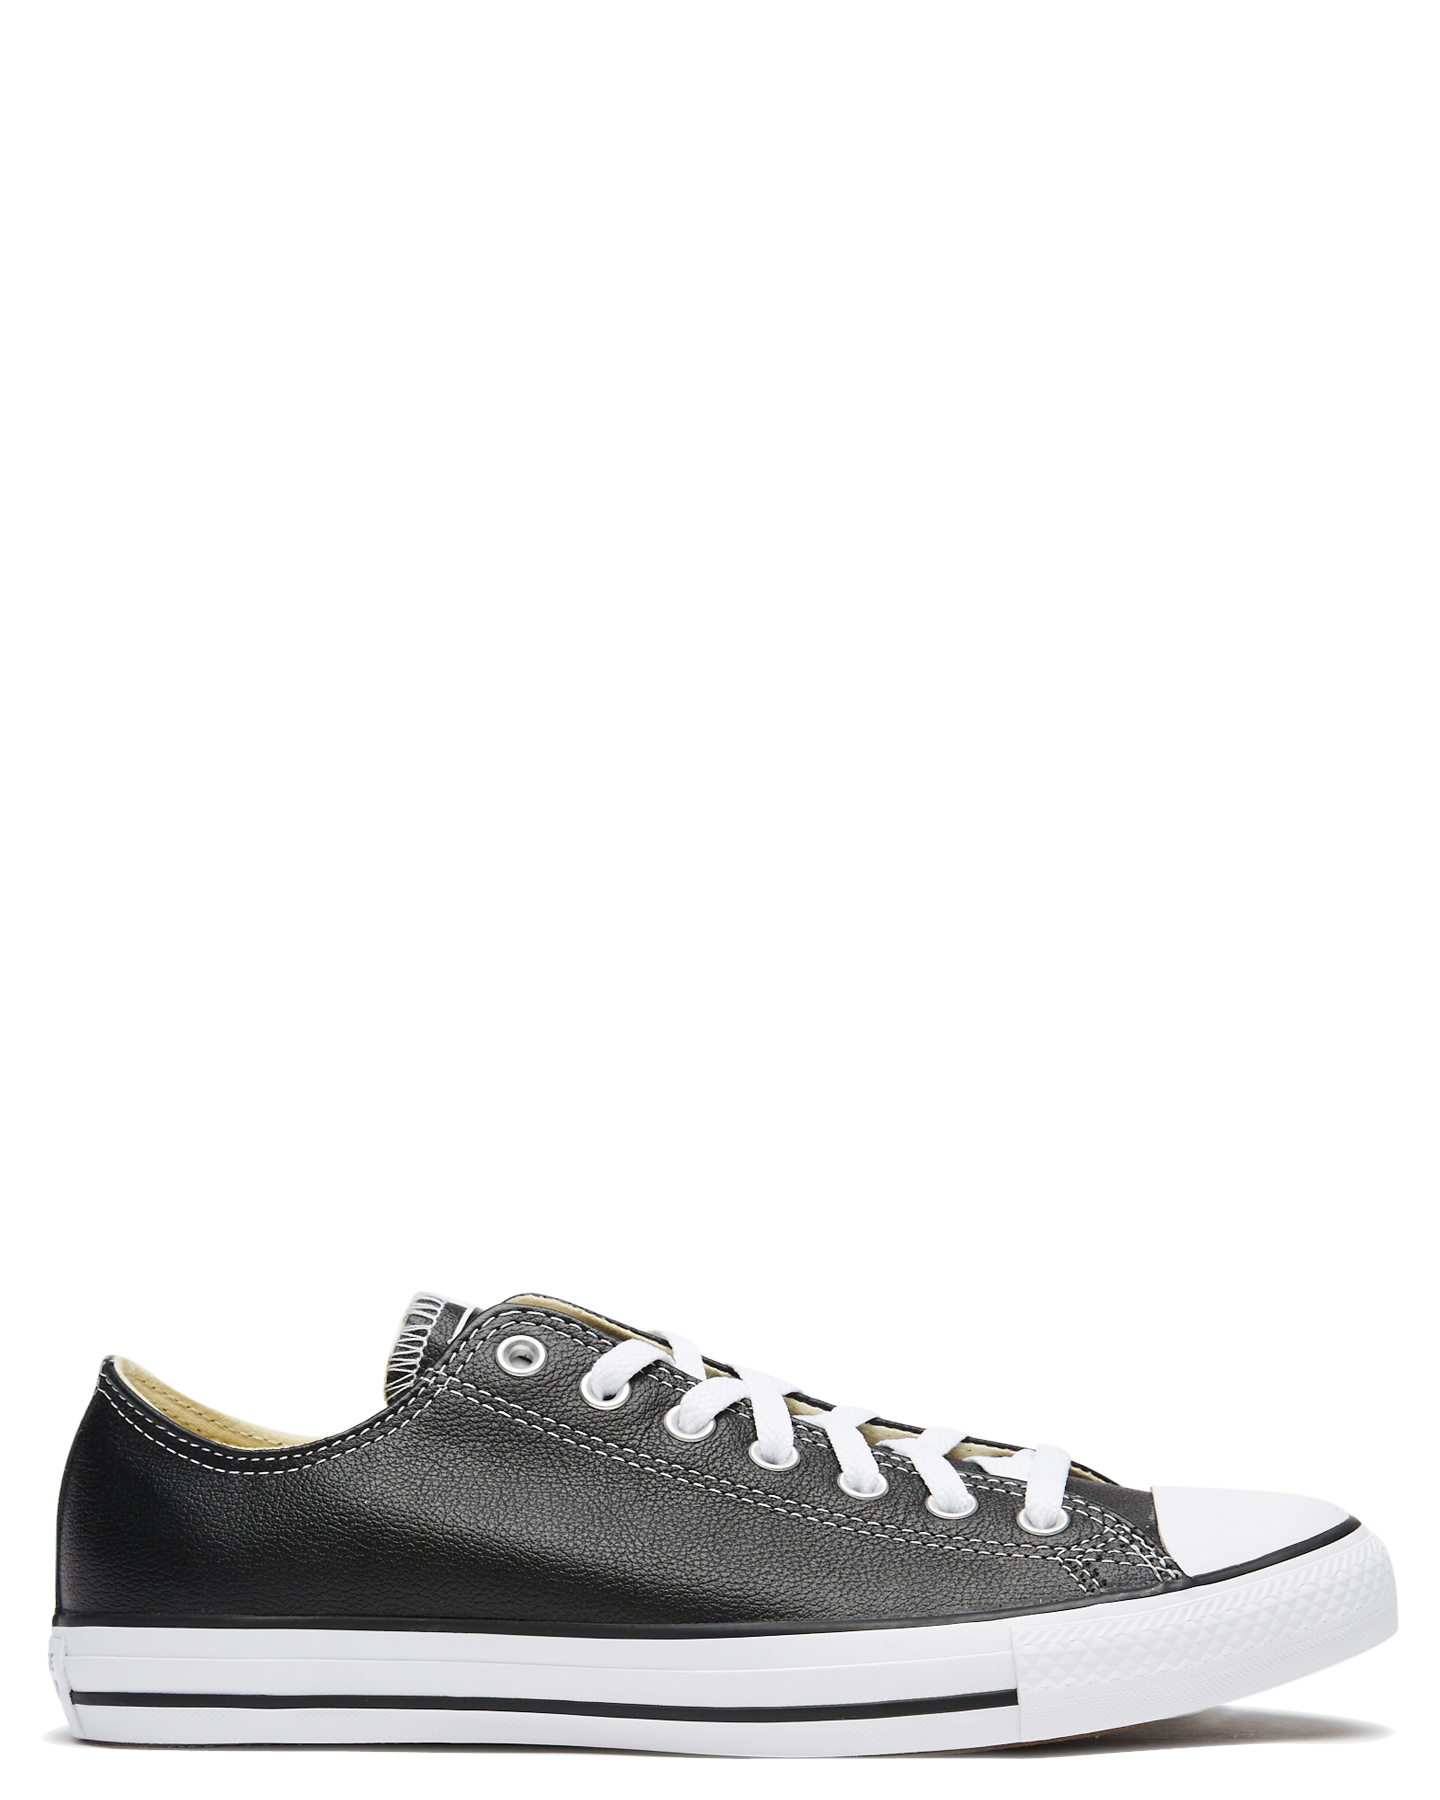 converse all star leather womens